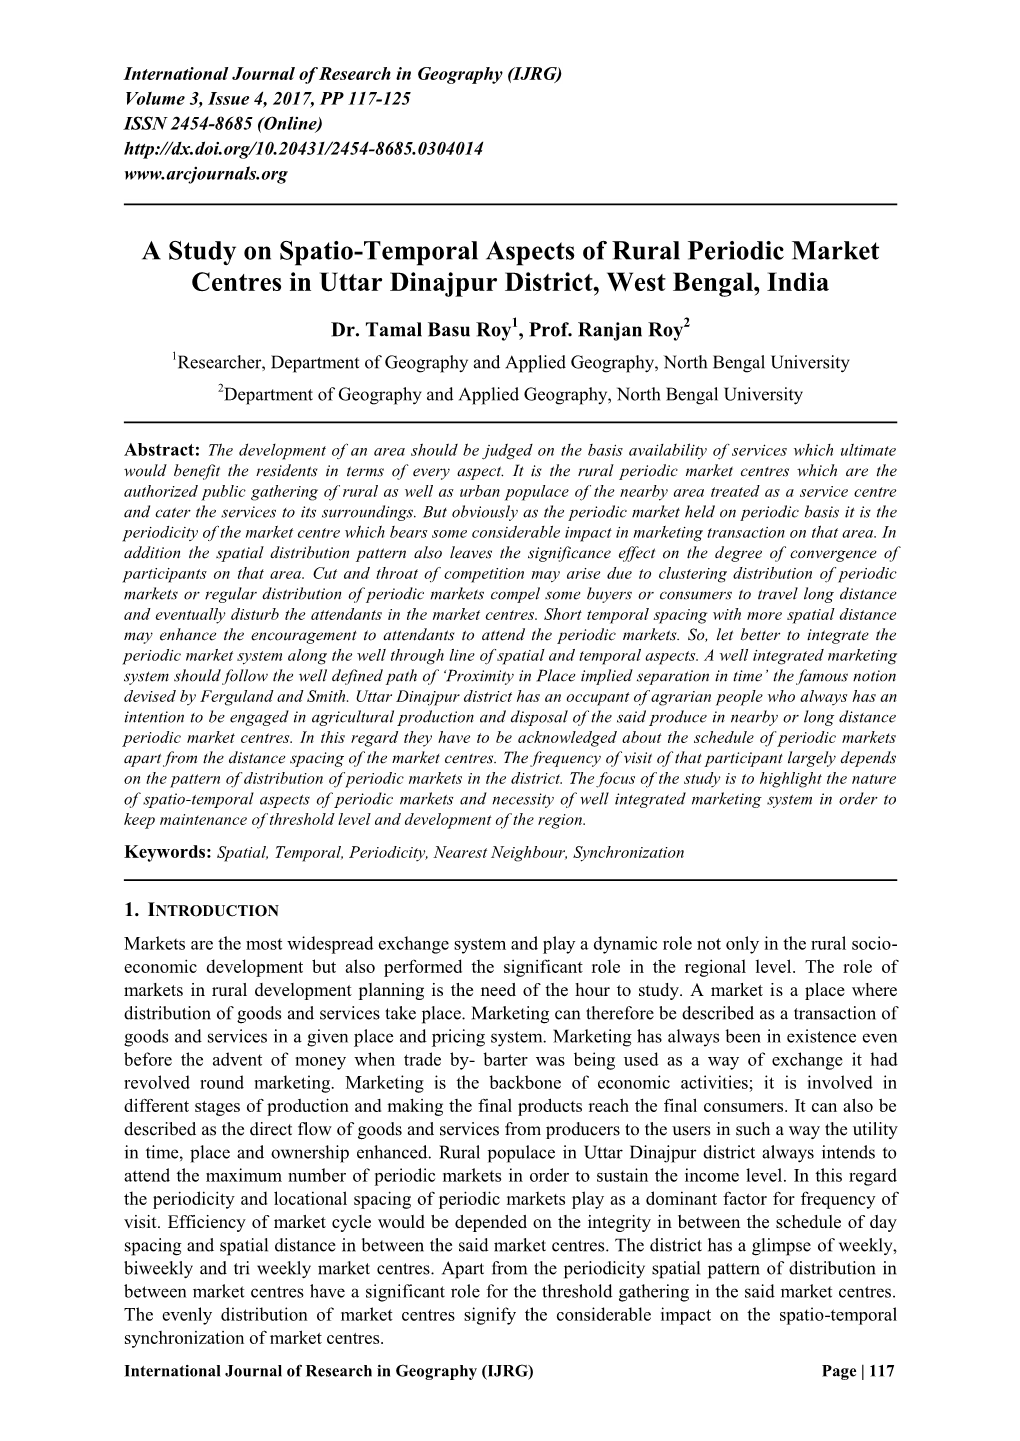 A Study on Spatio-Temporal Aspects of Rural Periodic Market Centres in Uttar Dinajpur District, West Bengal, India